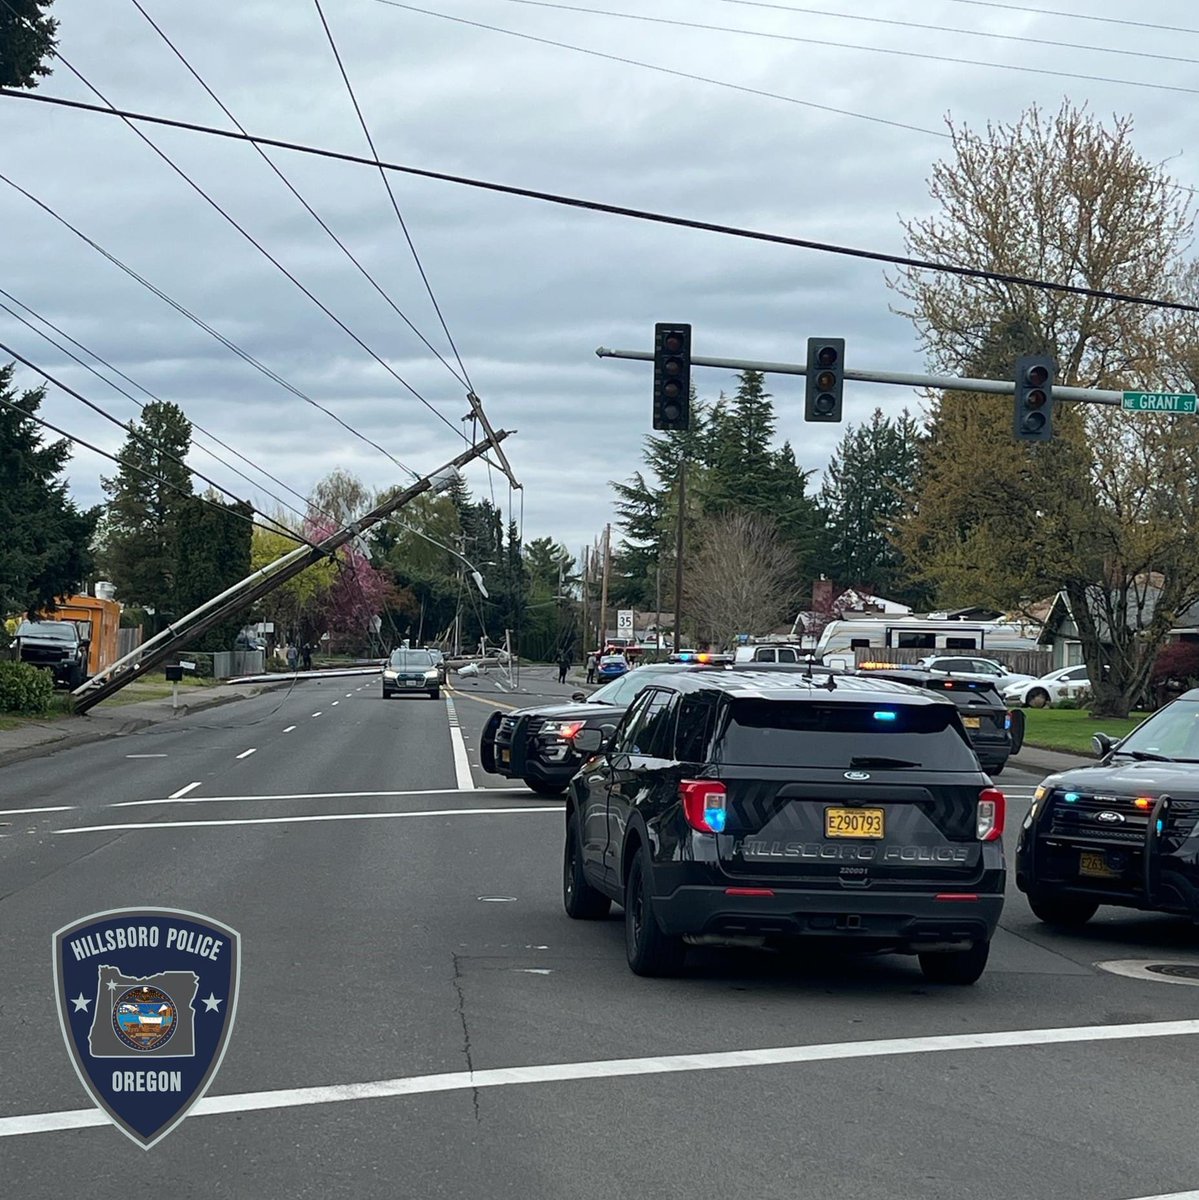 TRAFFIC ALERT | NE Cornell Road is closed between NE Grants St and and NE Arrington Road due to a injury traffic crash. Several power poles are affected resulting in power outages. Please use an alternate route.